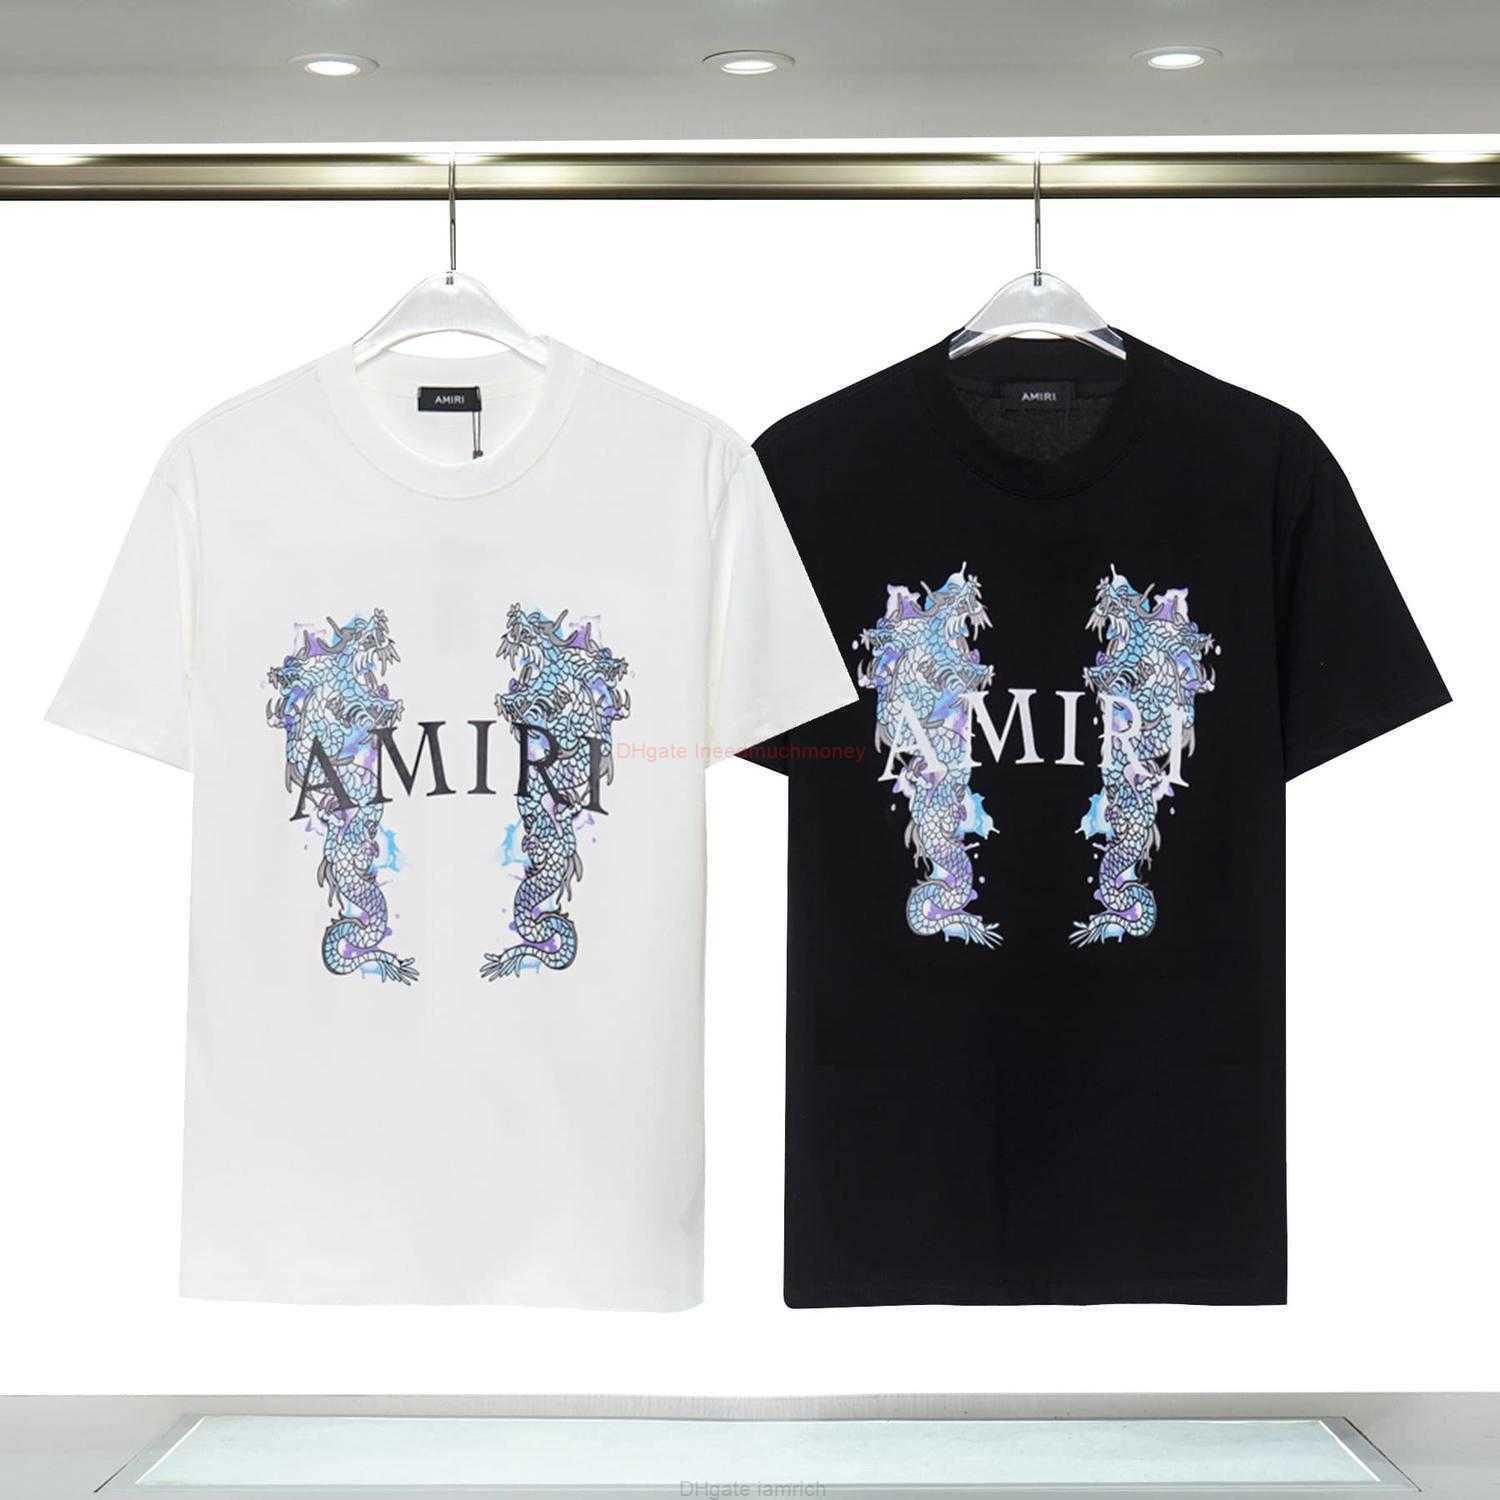 

Designer Fashion Clothing Amires Tees Am Tshirt 2023 Early Spring New Emir Amies Short Sleeve Tshirt Unisex Double Dragon Pattern Letter Loose Top Luxury Casual Tops, White